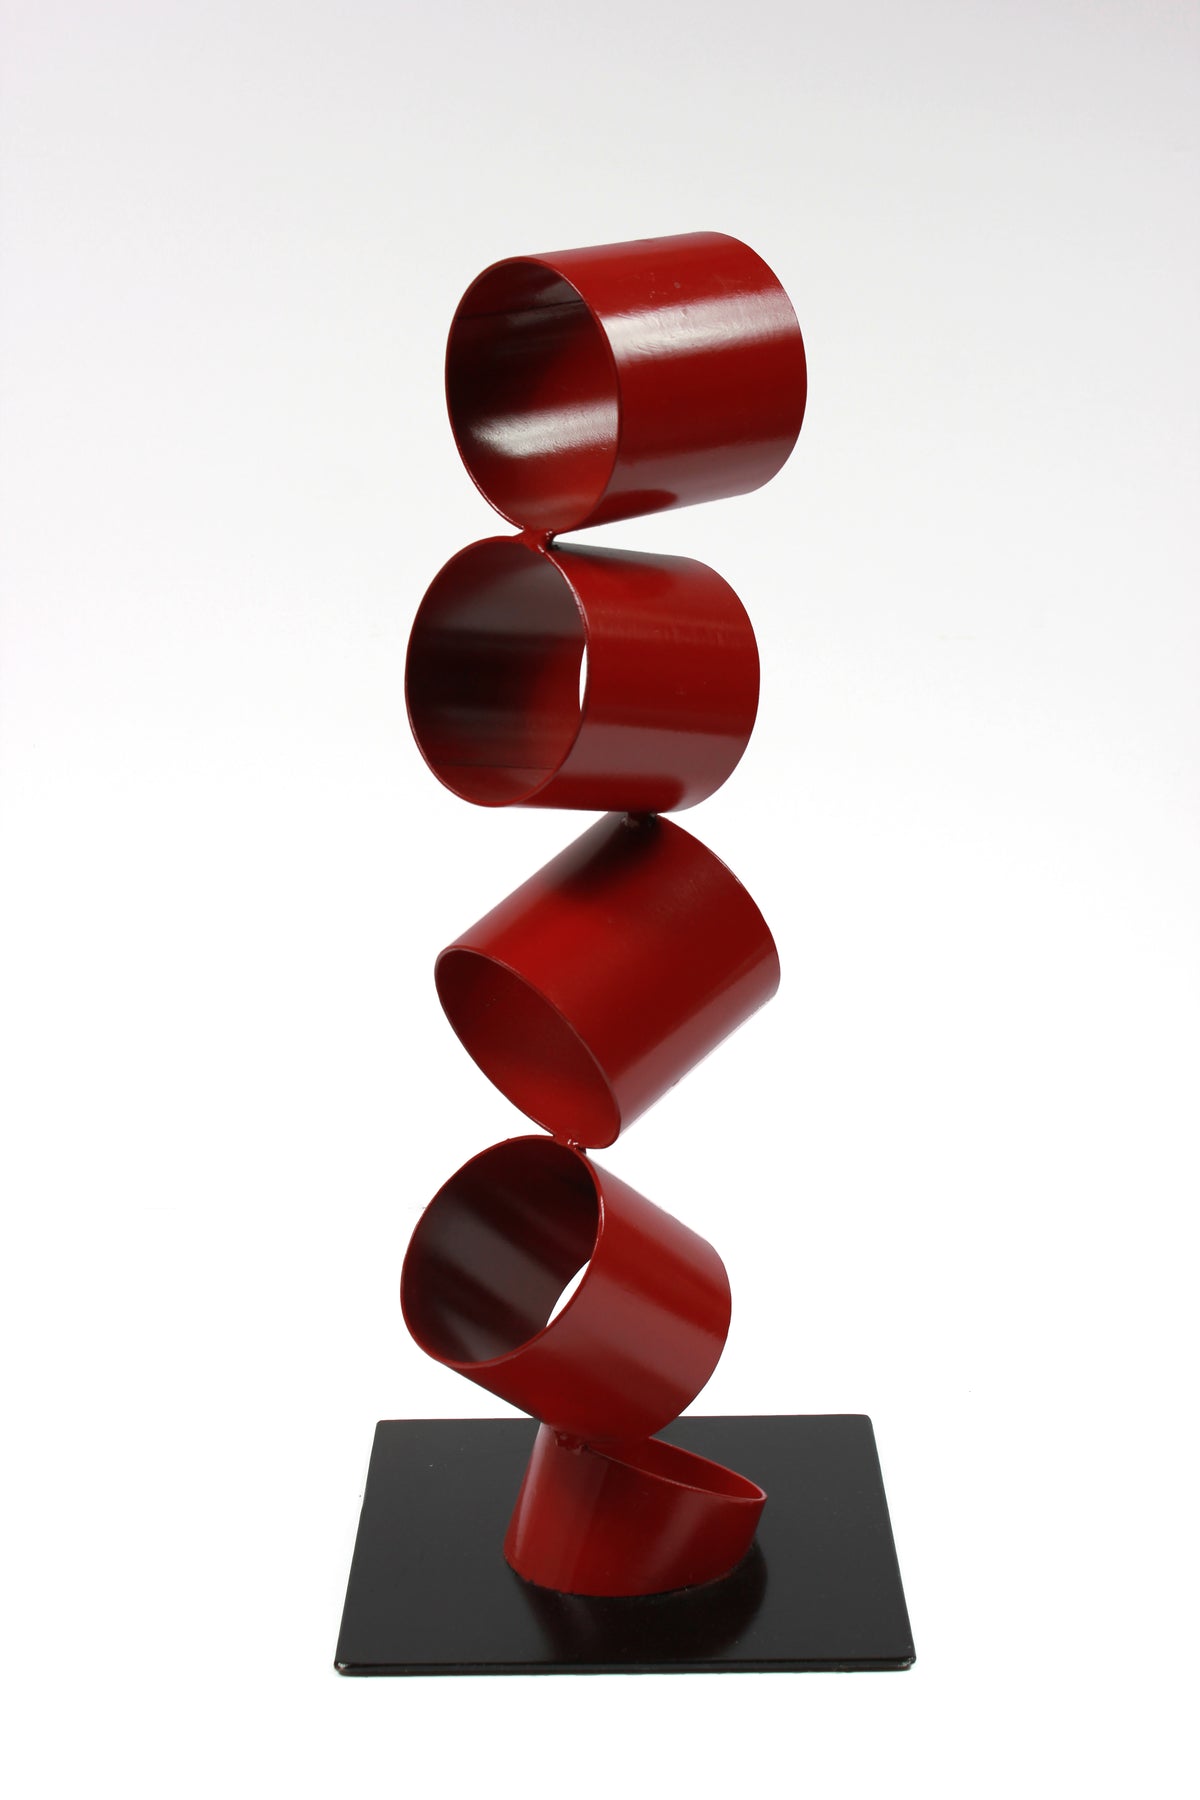 Six Red Rings in an Angled Stack &lt;br&gt;Multimedia Metal Sculpture &lt;br&gt;&lt;br&gt;#A9336